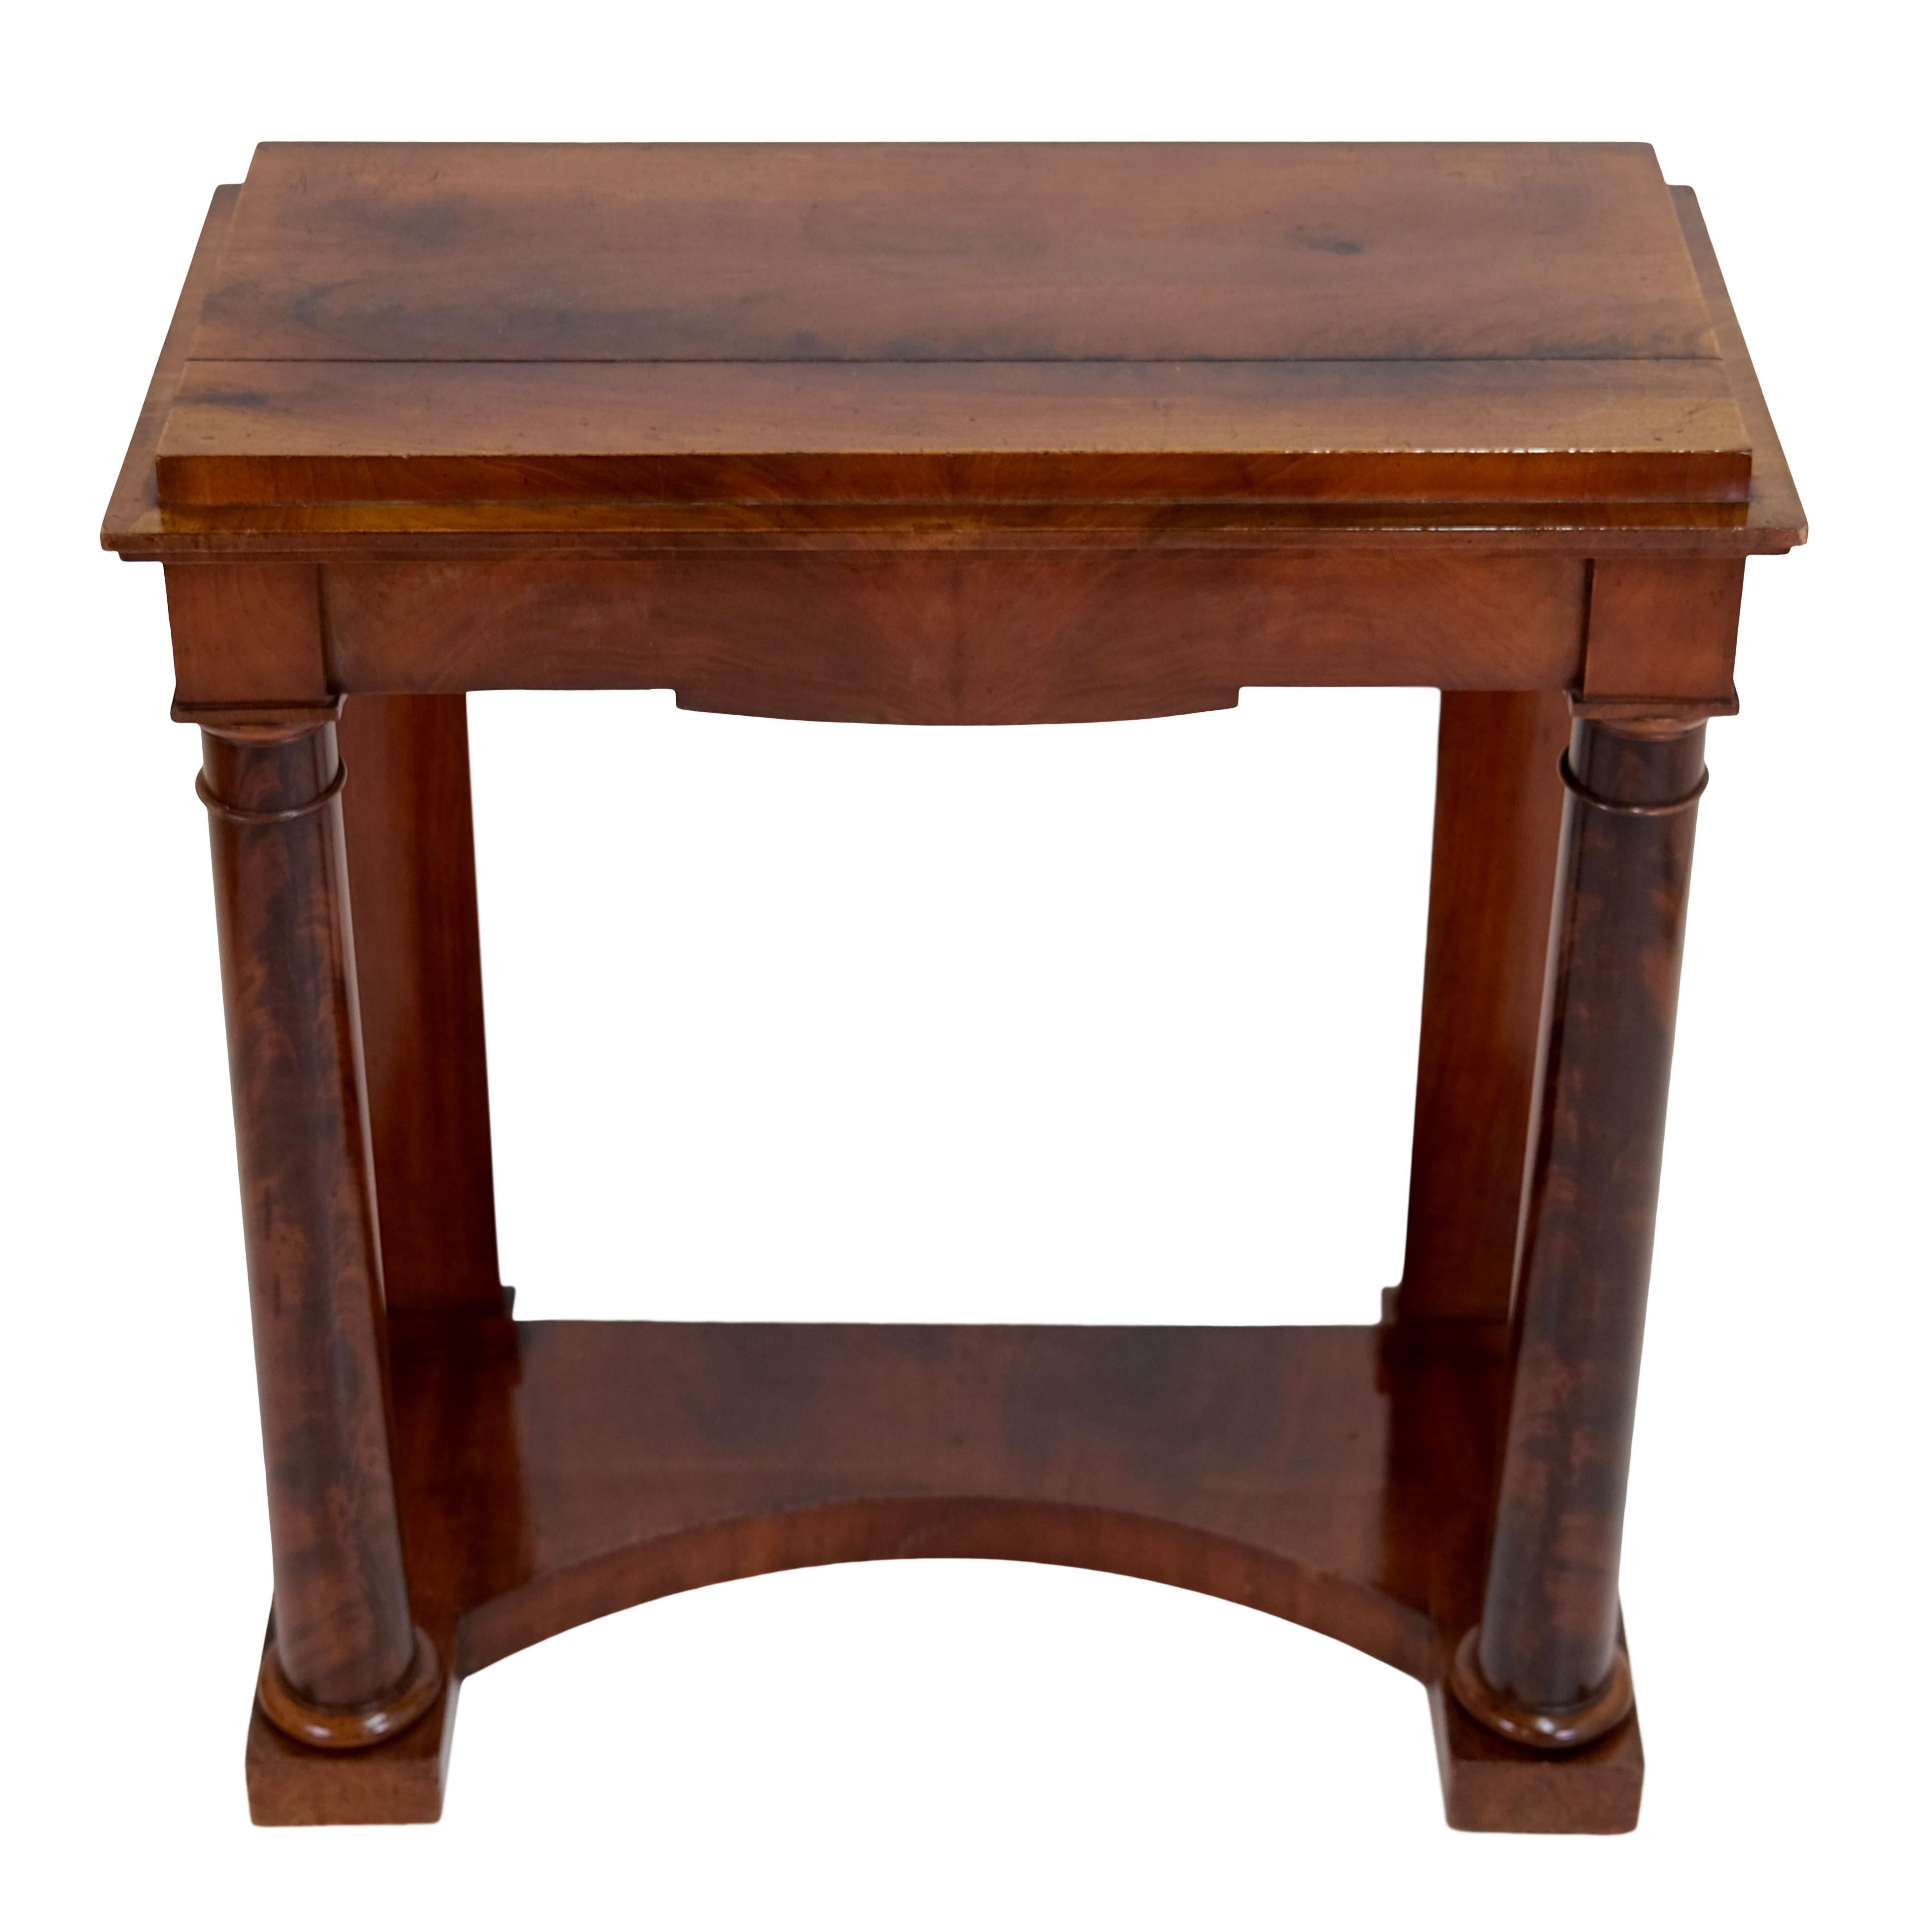 Console table with columns
Mahogany, shellac hand polished

Empire, France around 1810

Dimensions:
Width: 71,5 cm
Height: 80 cm
Depth: 33,5 cm.